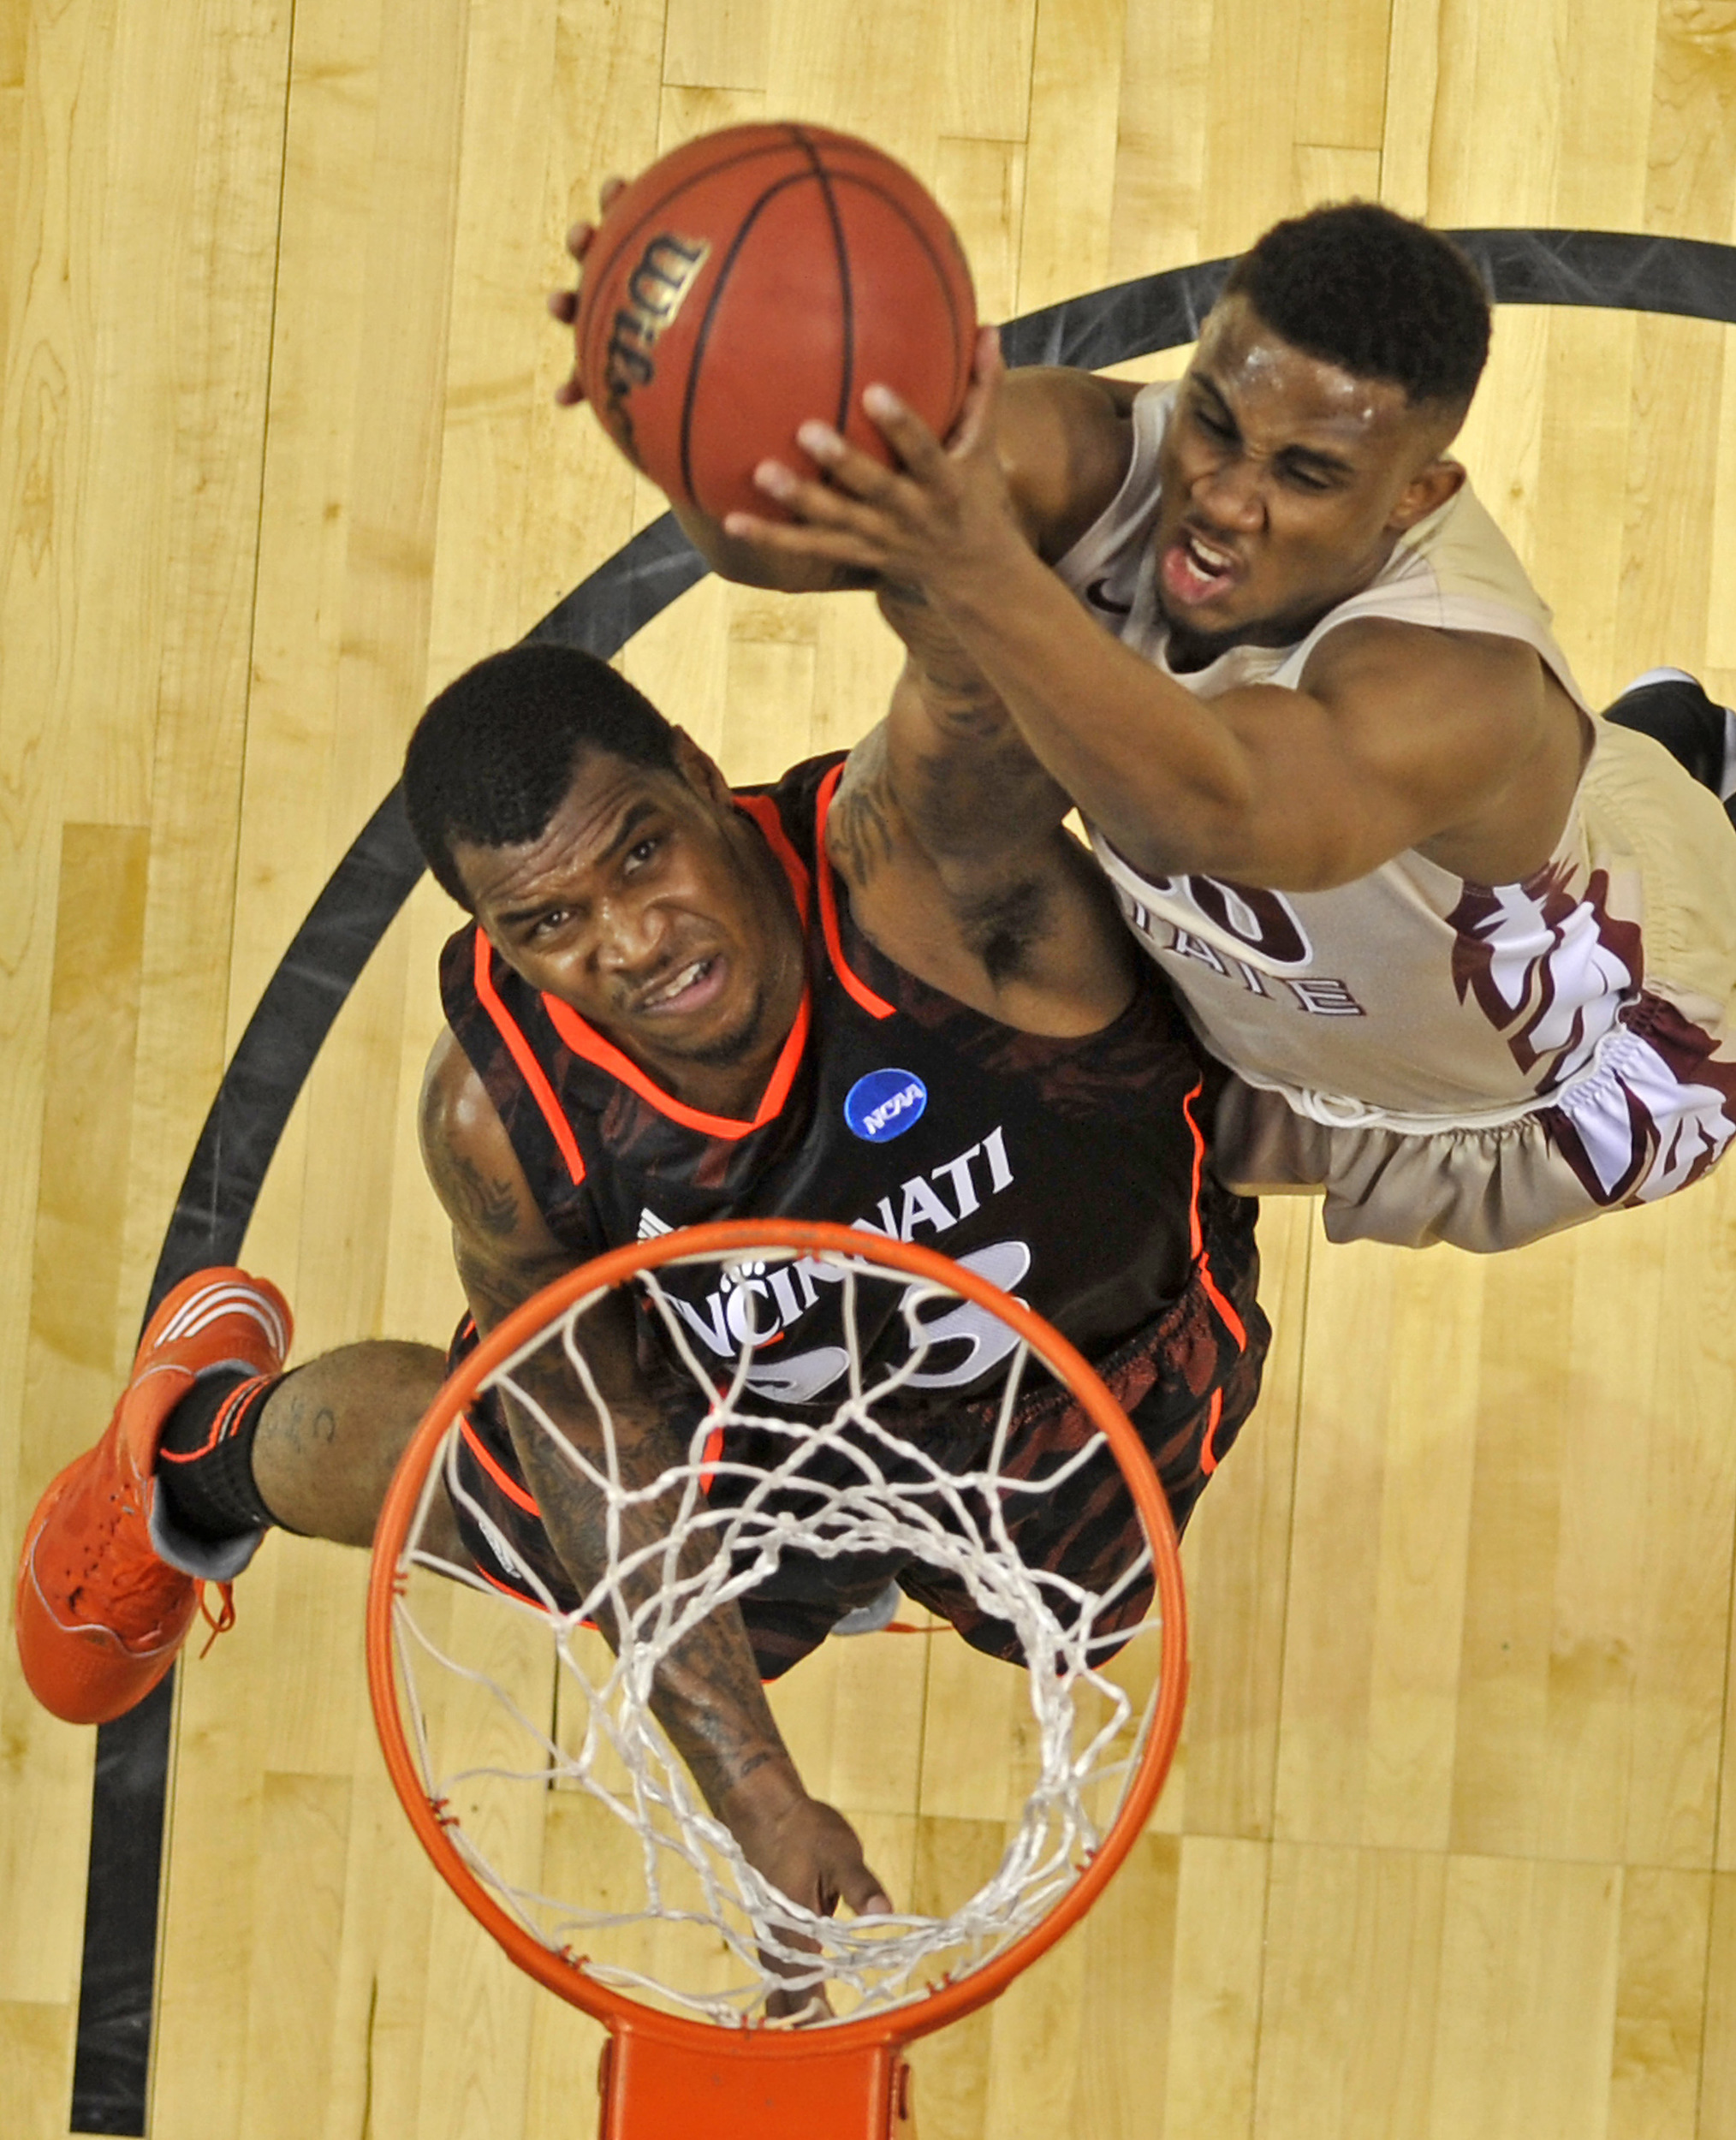  Cincinnati guard Sean Kilpatrick (23) fights for a rebound with Florida State guard Ian Miller during the first half of the NCAA Men's Third Rounds at Bridgestone Arena in Nashville, Tenn., Sunday, March 18, 2012.  